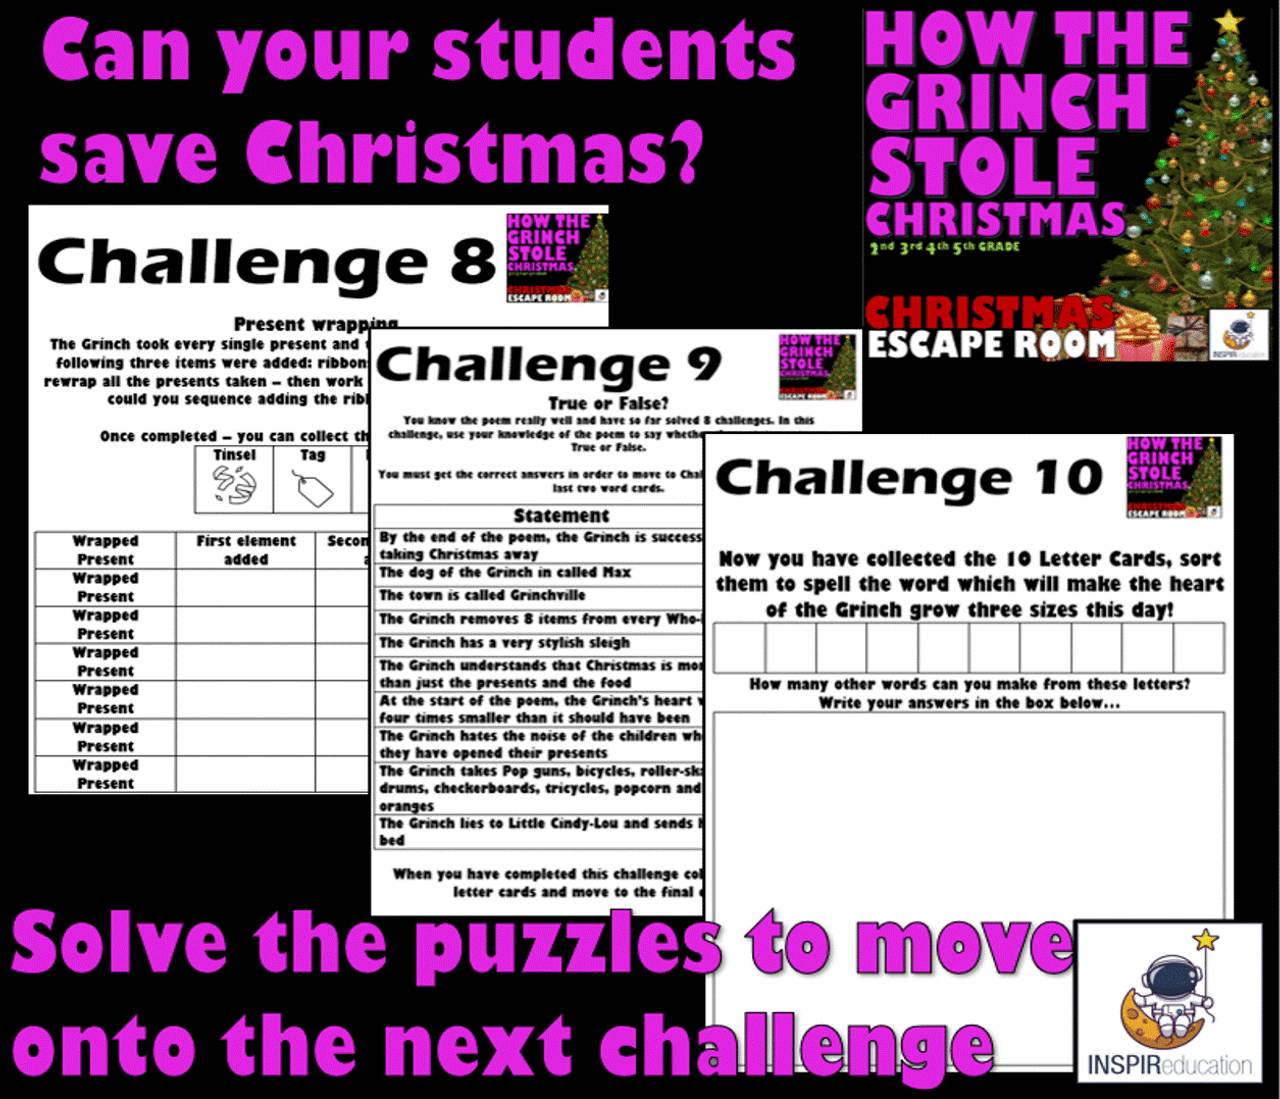 How the Grinch Stole Christmas: ESCAPE ROOM - 10 Challenges, Answer Key and all resources - PRINT AND GO